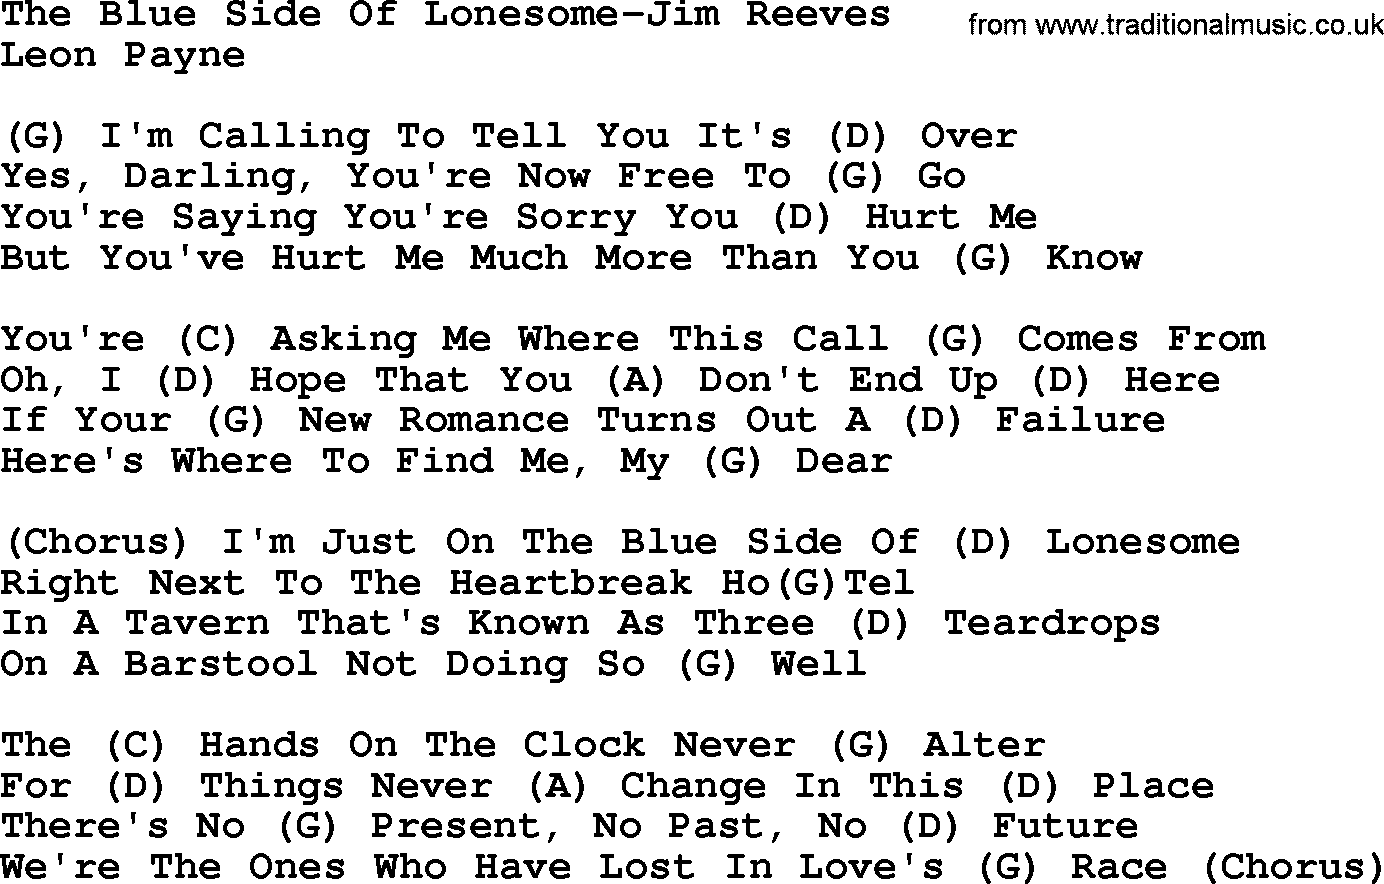 Country music song: The Blue Side Of Lonesome-Jim Reeves lyrics and chords